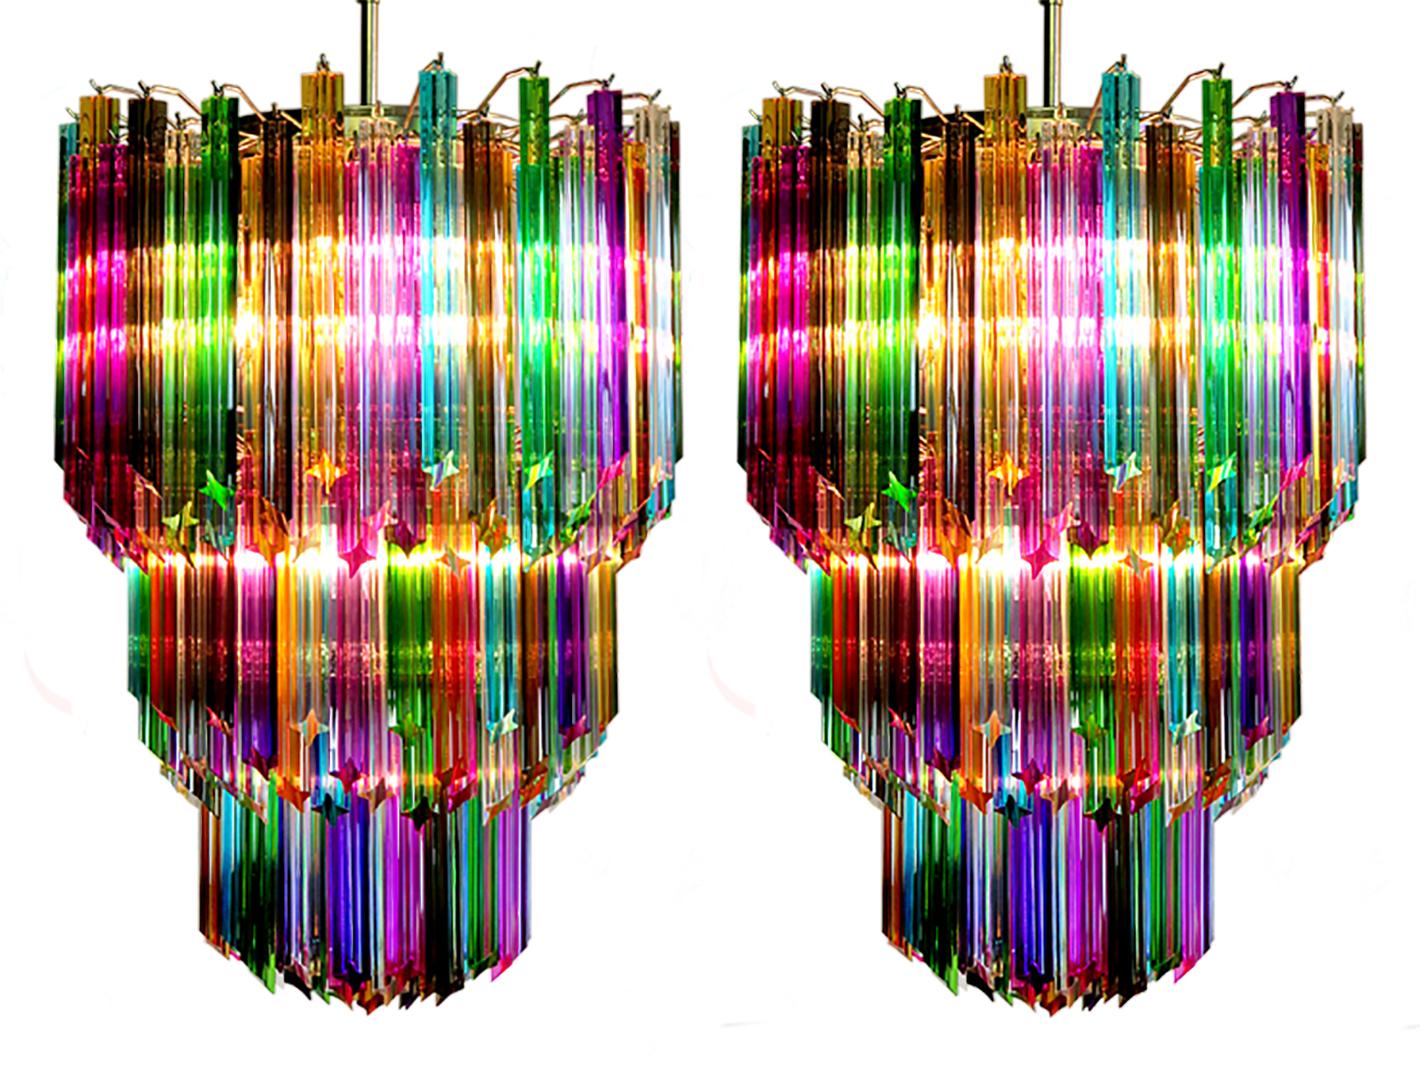 Fantastic vintage Murano chandelier made by 184 Murano crystal multicolored prism (QUADRIEDRI) in a nickel metal frame. The glasses are transparent, blue, smoky, purple, green, yellow and pink. The glasses have two different sizes.
Period: